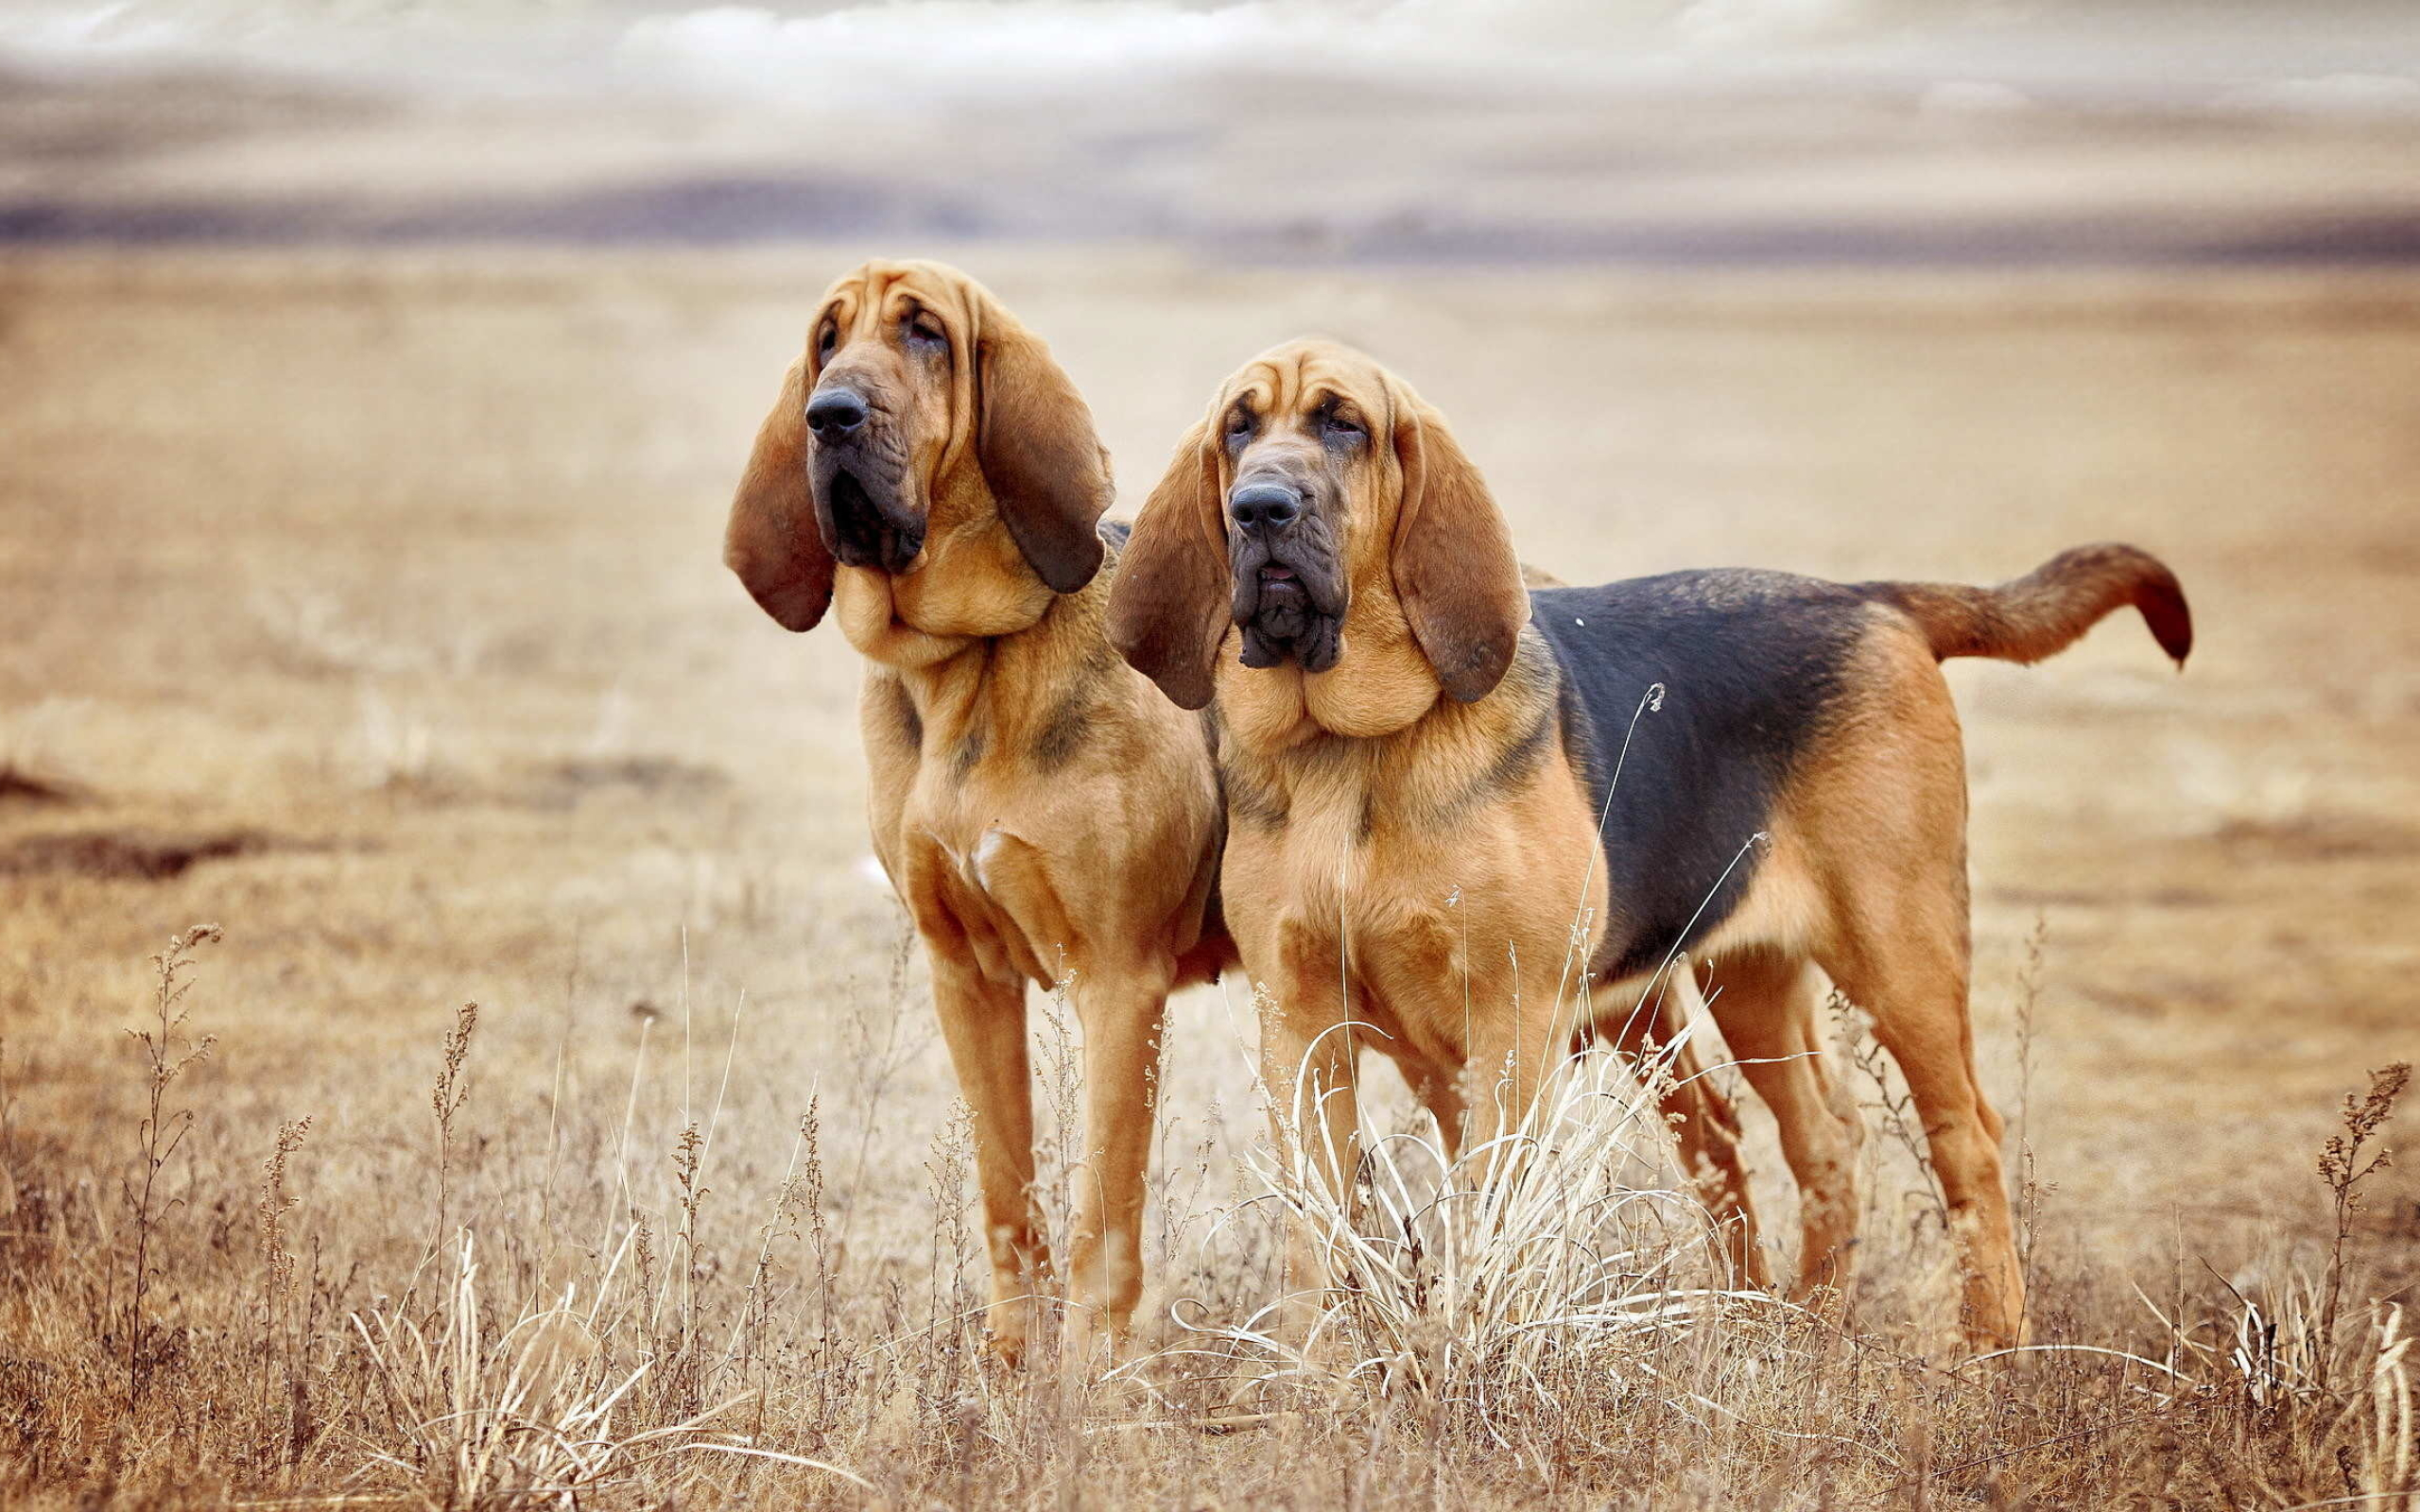 Bloodhound, High-resolution wallpapers, Canine companions, Dog breed, 2560x1600 HD Desktop